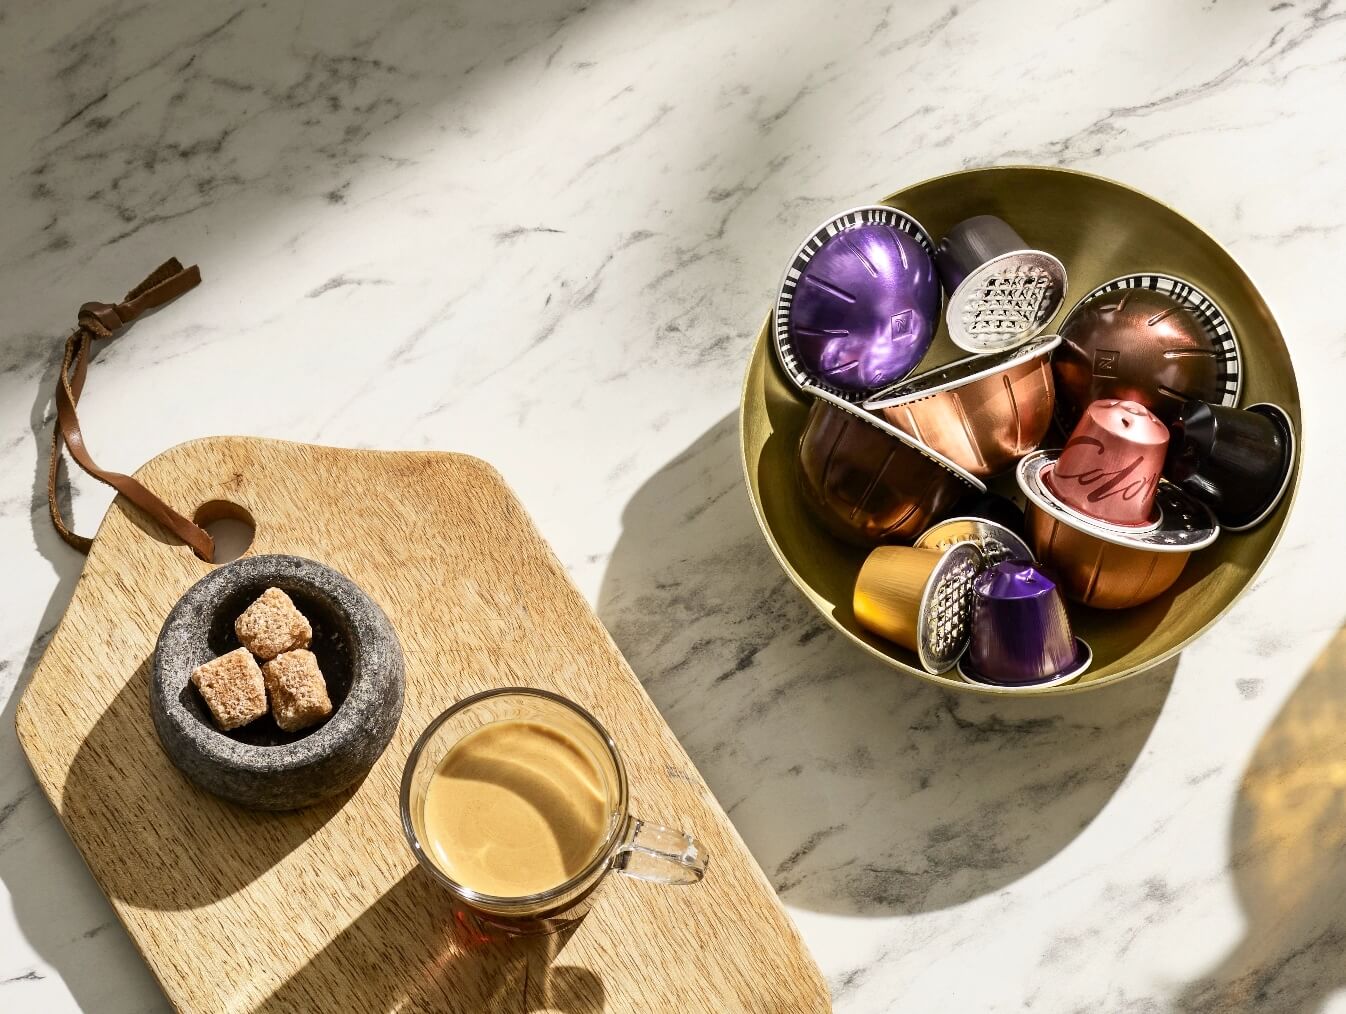 Decorative image of Nespresso pods in a gold bowl next to a black Nespresso recycling bag on a white marble counter.